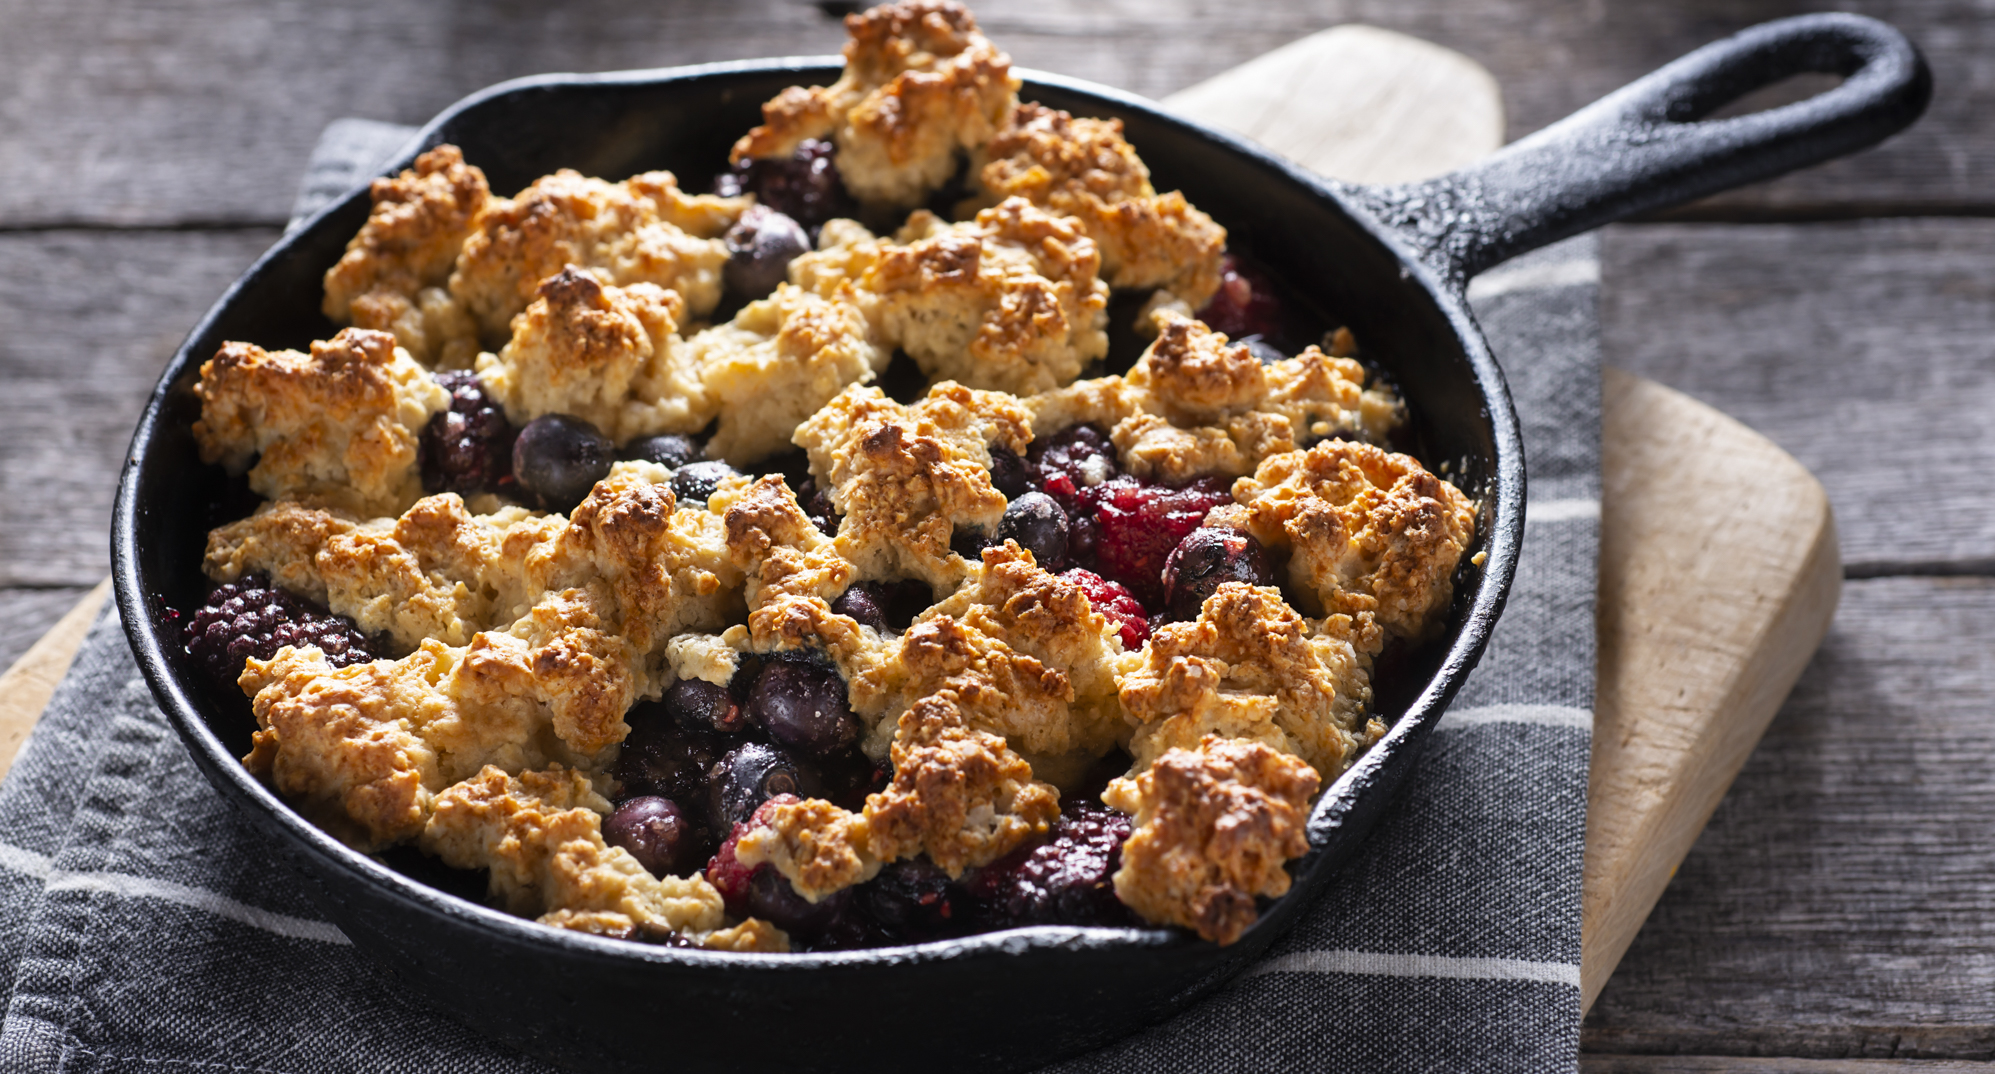 Mixed berry cobbler with whole wheat biscuit topping